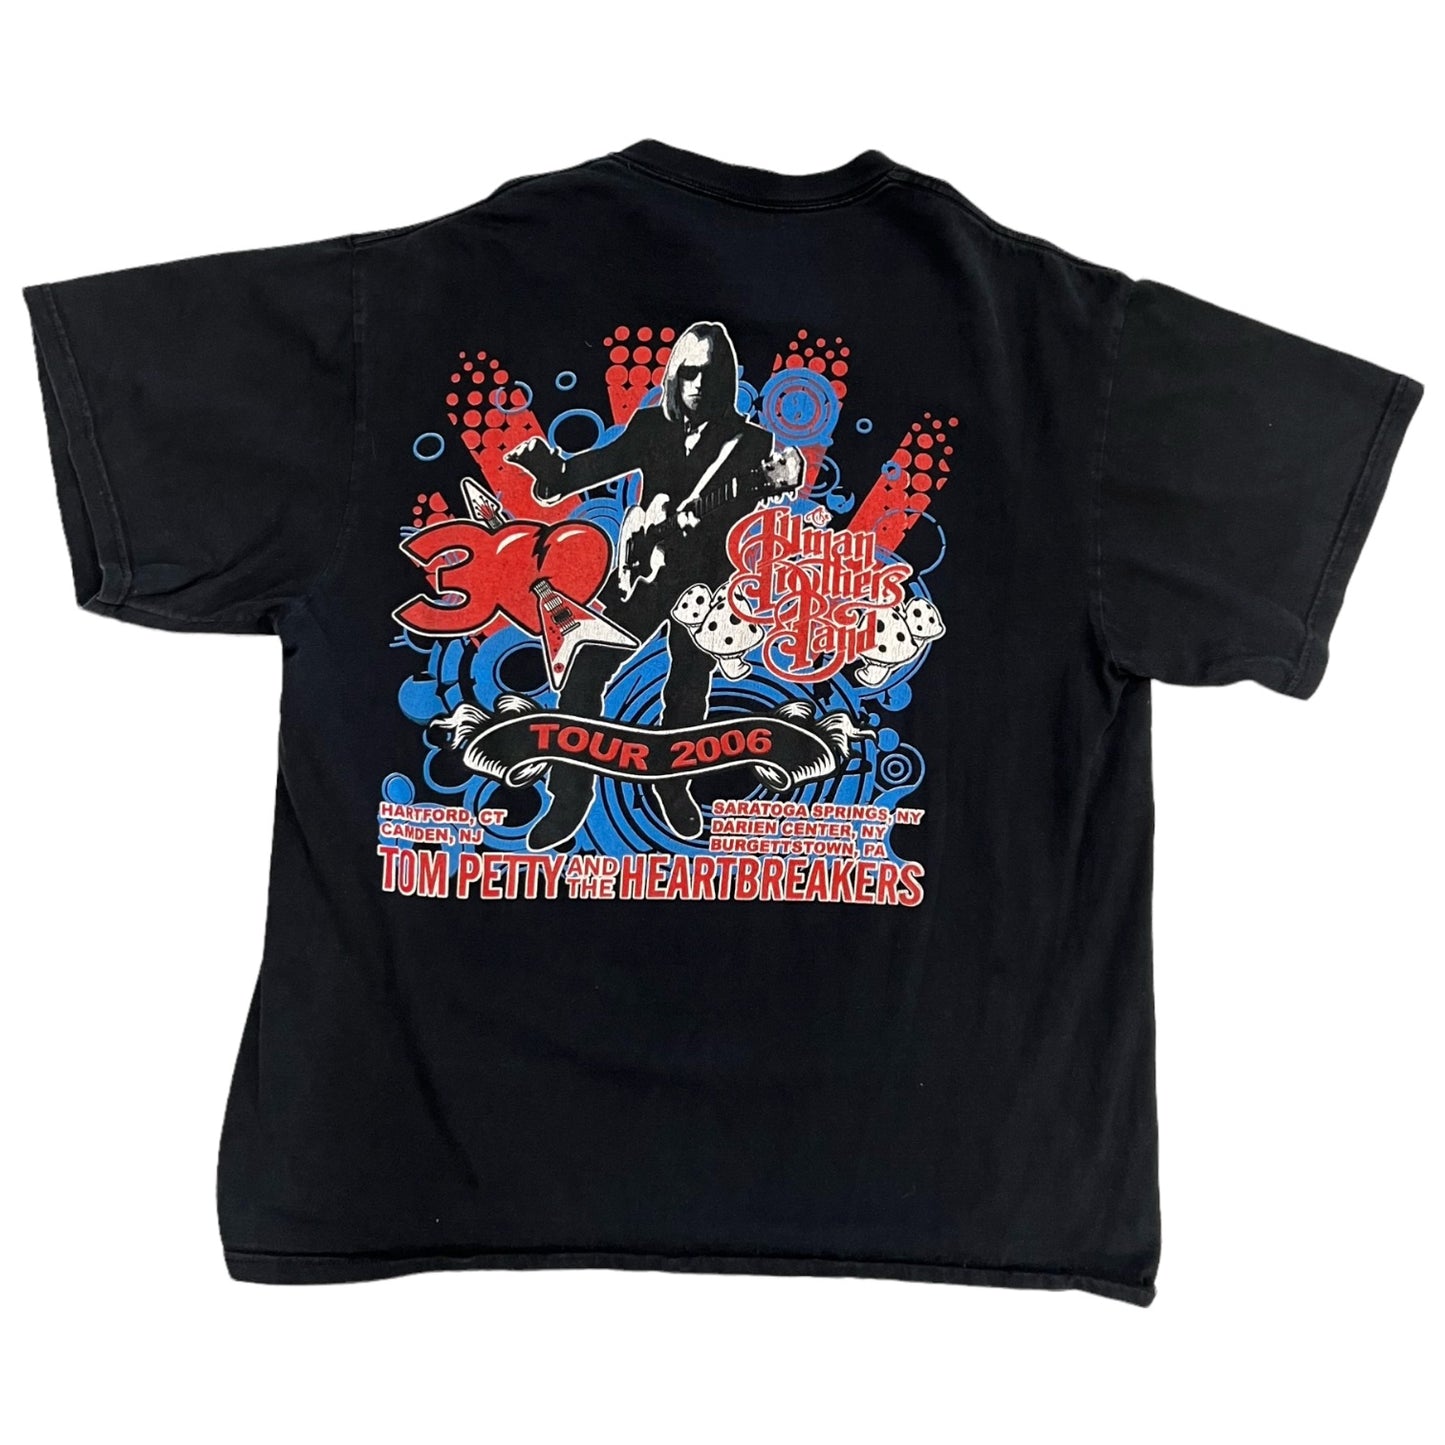 2006 tom petty and the heart breakers vintage tour tee